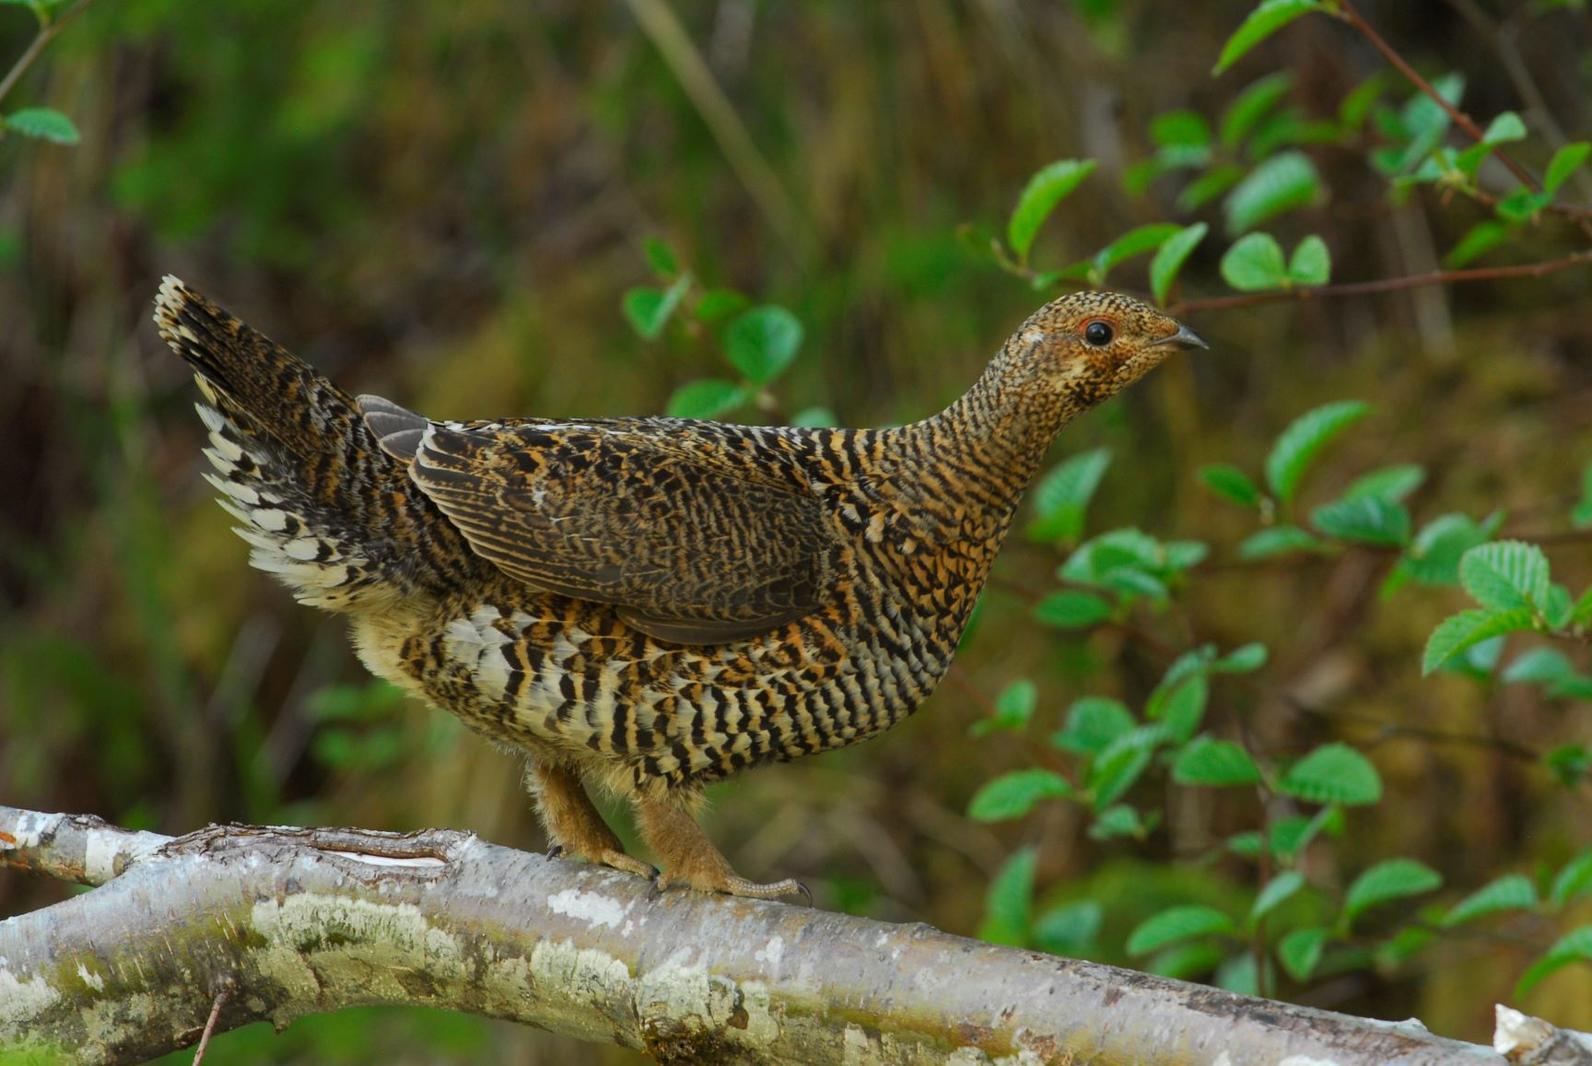 Prince of Wales Spruce Grouse is a subspecies of the Spruce Grouse found only on Prince of Wales Island in the Tongass National Forest. 